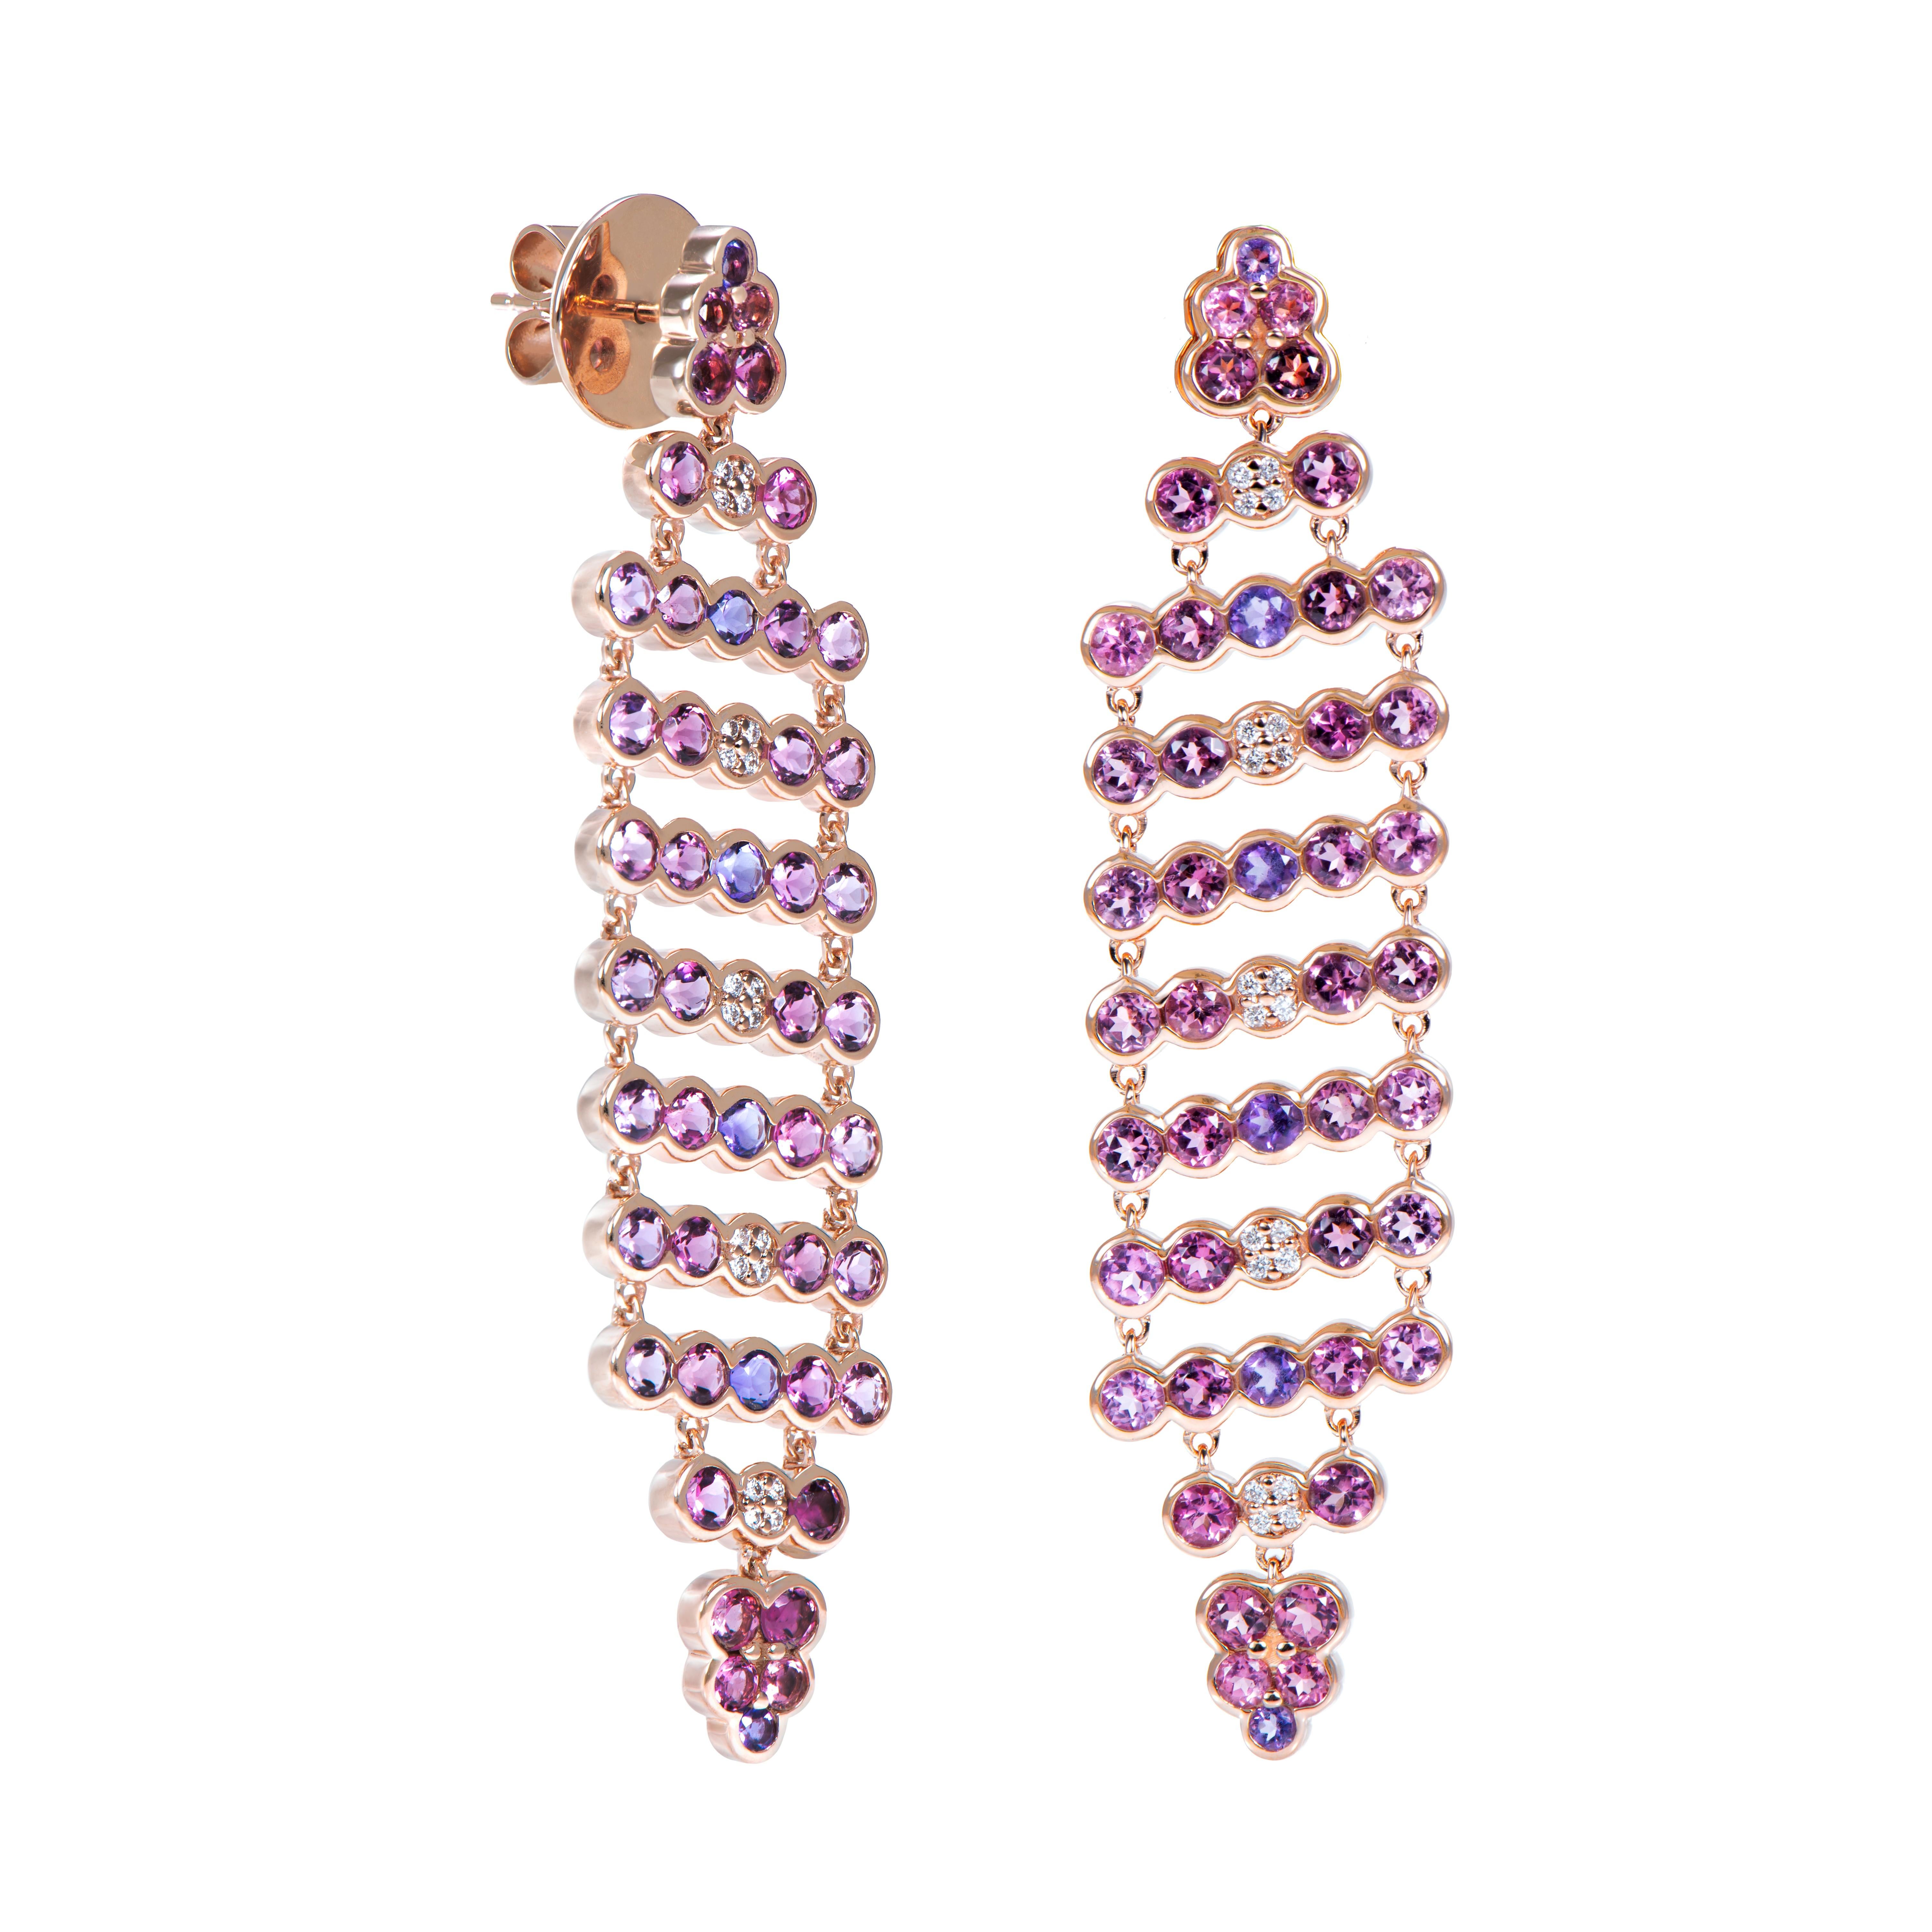 An exclusive collection of designer and unique dangle earrings by Sunita Nahata Fine Design.
These pretty Pairs Amethyst with pink tourmalines and diamonds Set in rose gold this collection is elegant and classy with any look.  

Amethyst Dangle